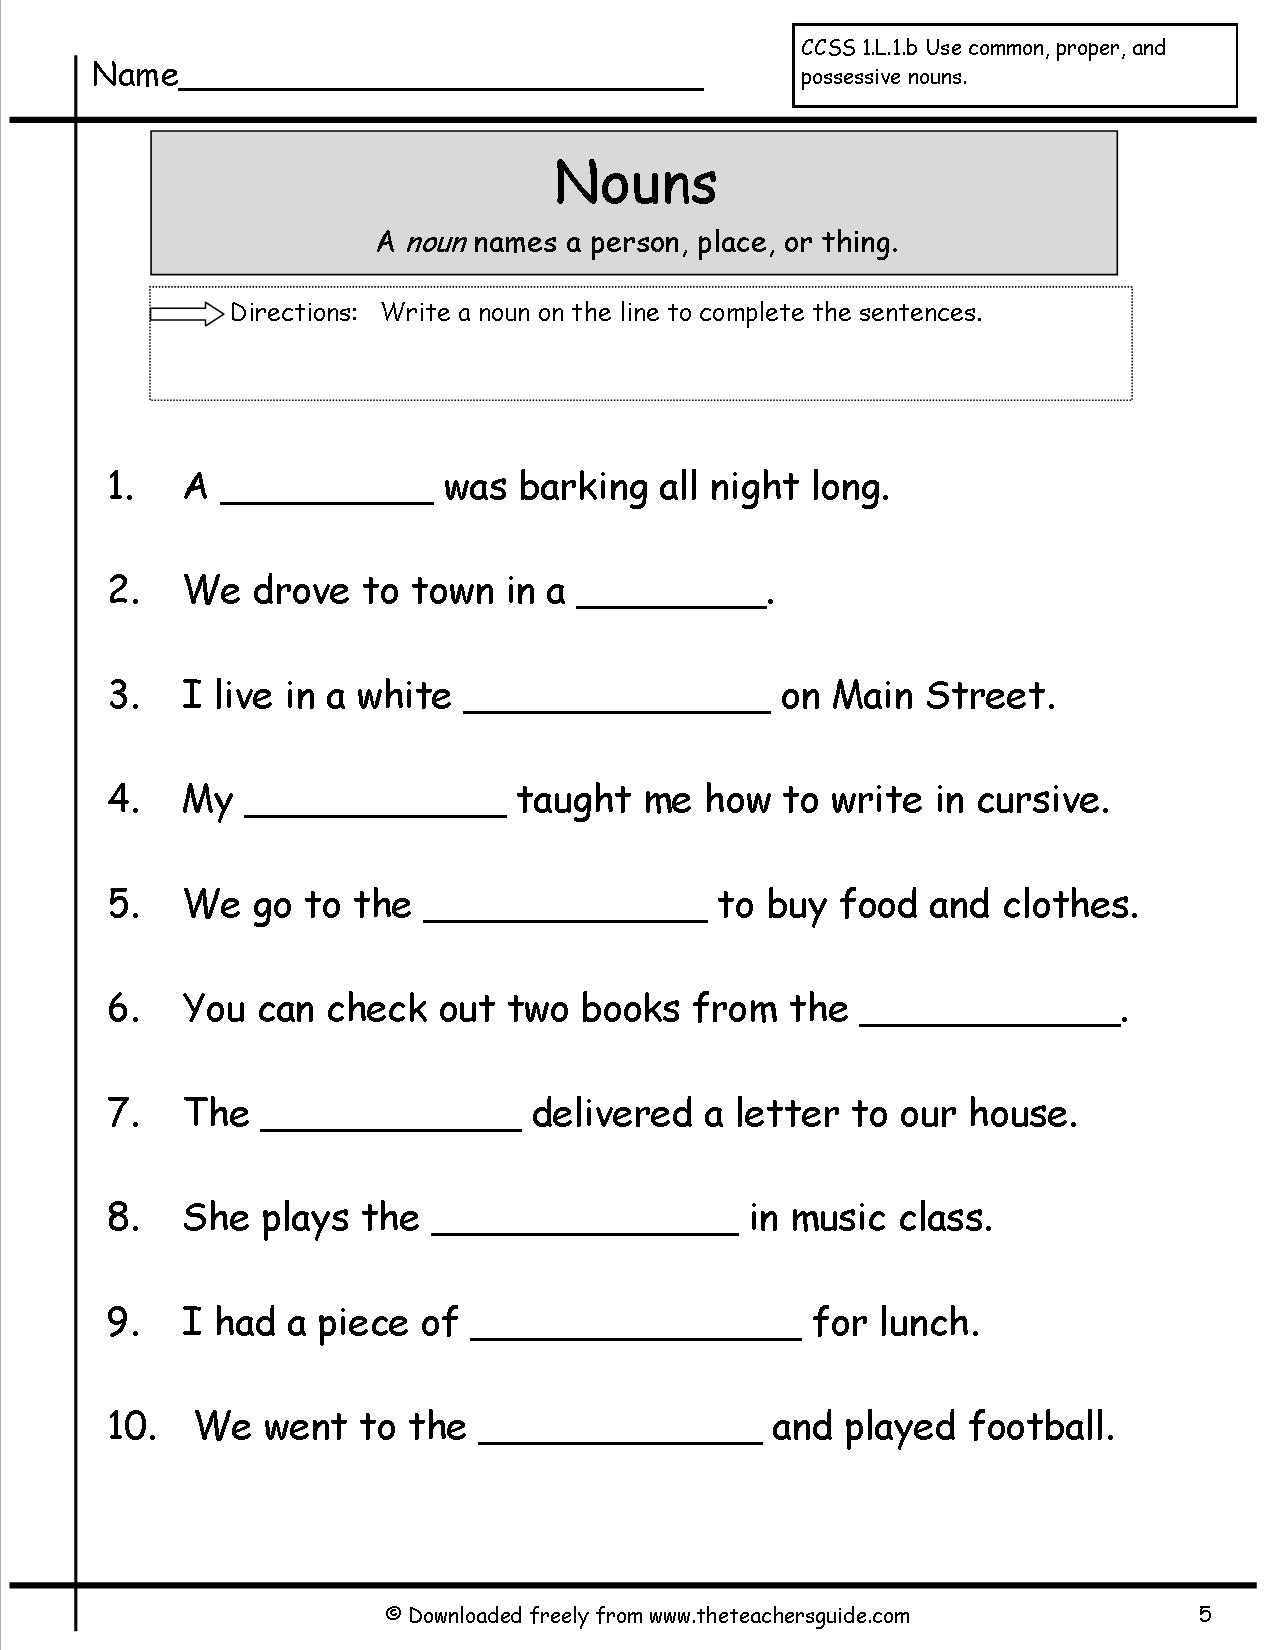 17-best-images-of-words-to-add-endings-worksheet-words-that-end-with-dge-and-ge-adding-ed-and